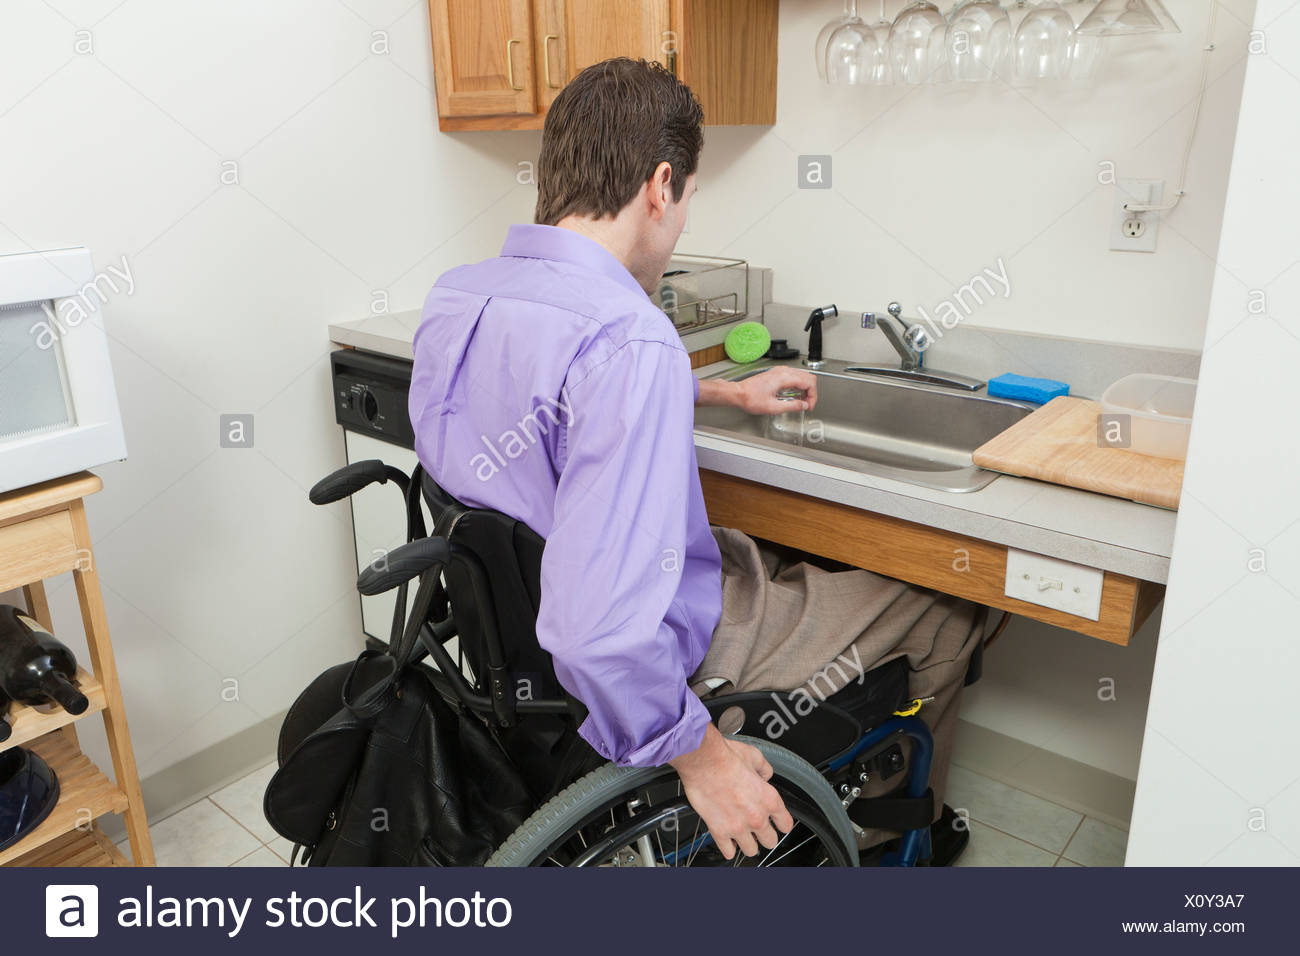 Man In Wheelchair With Spinal Cord Injury Preparing To Wash